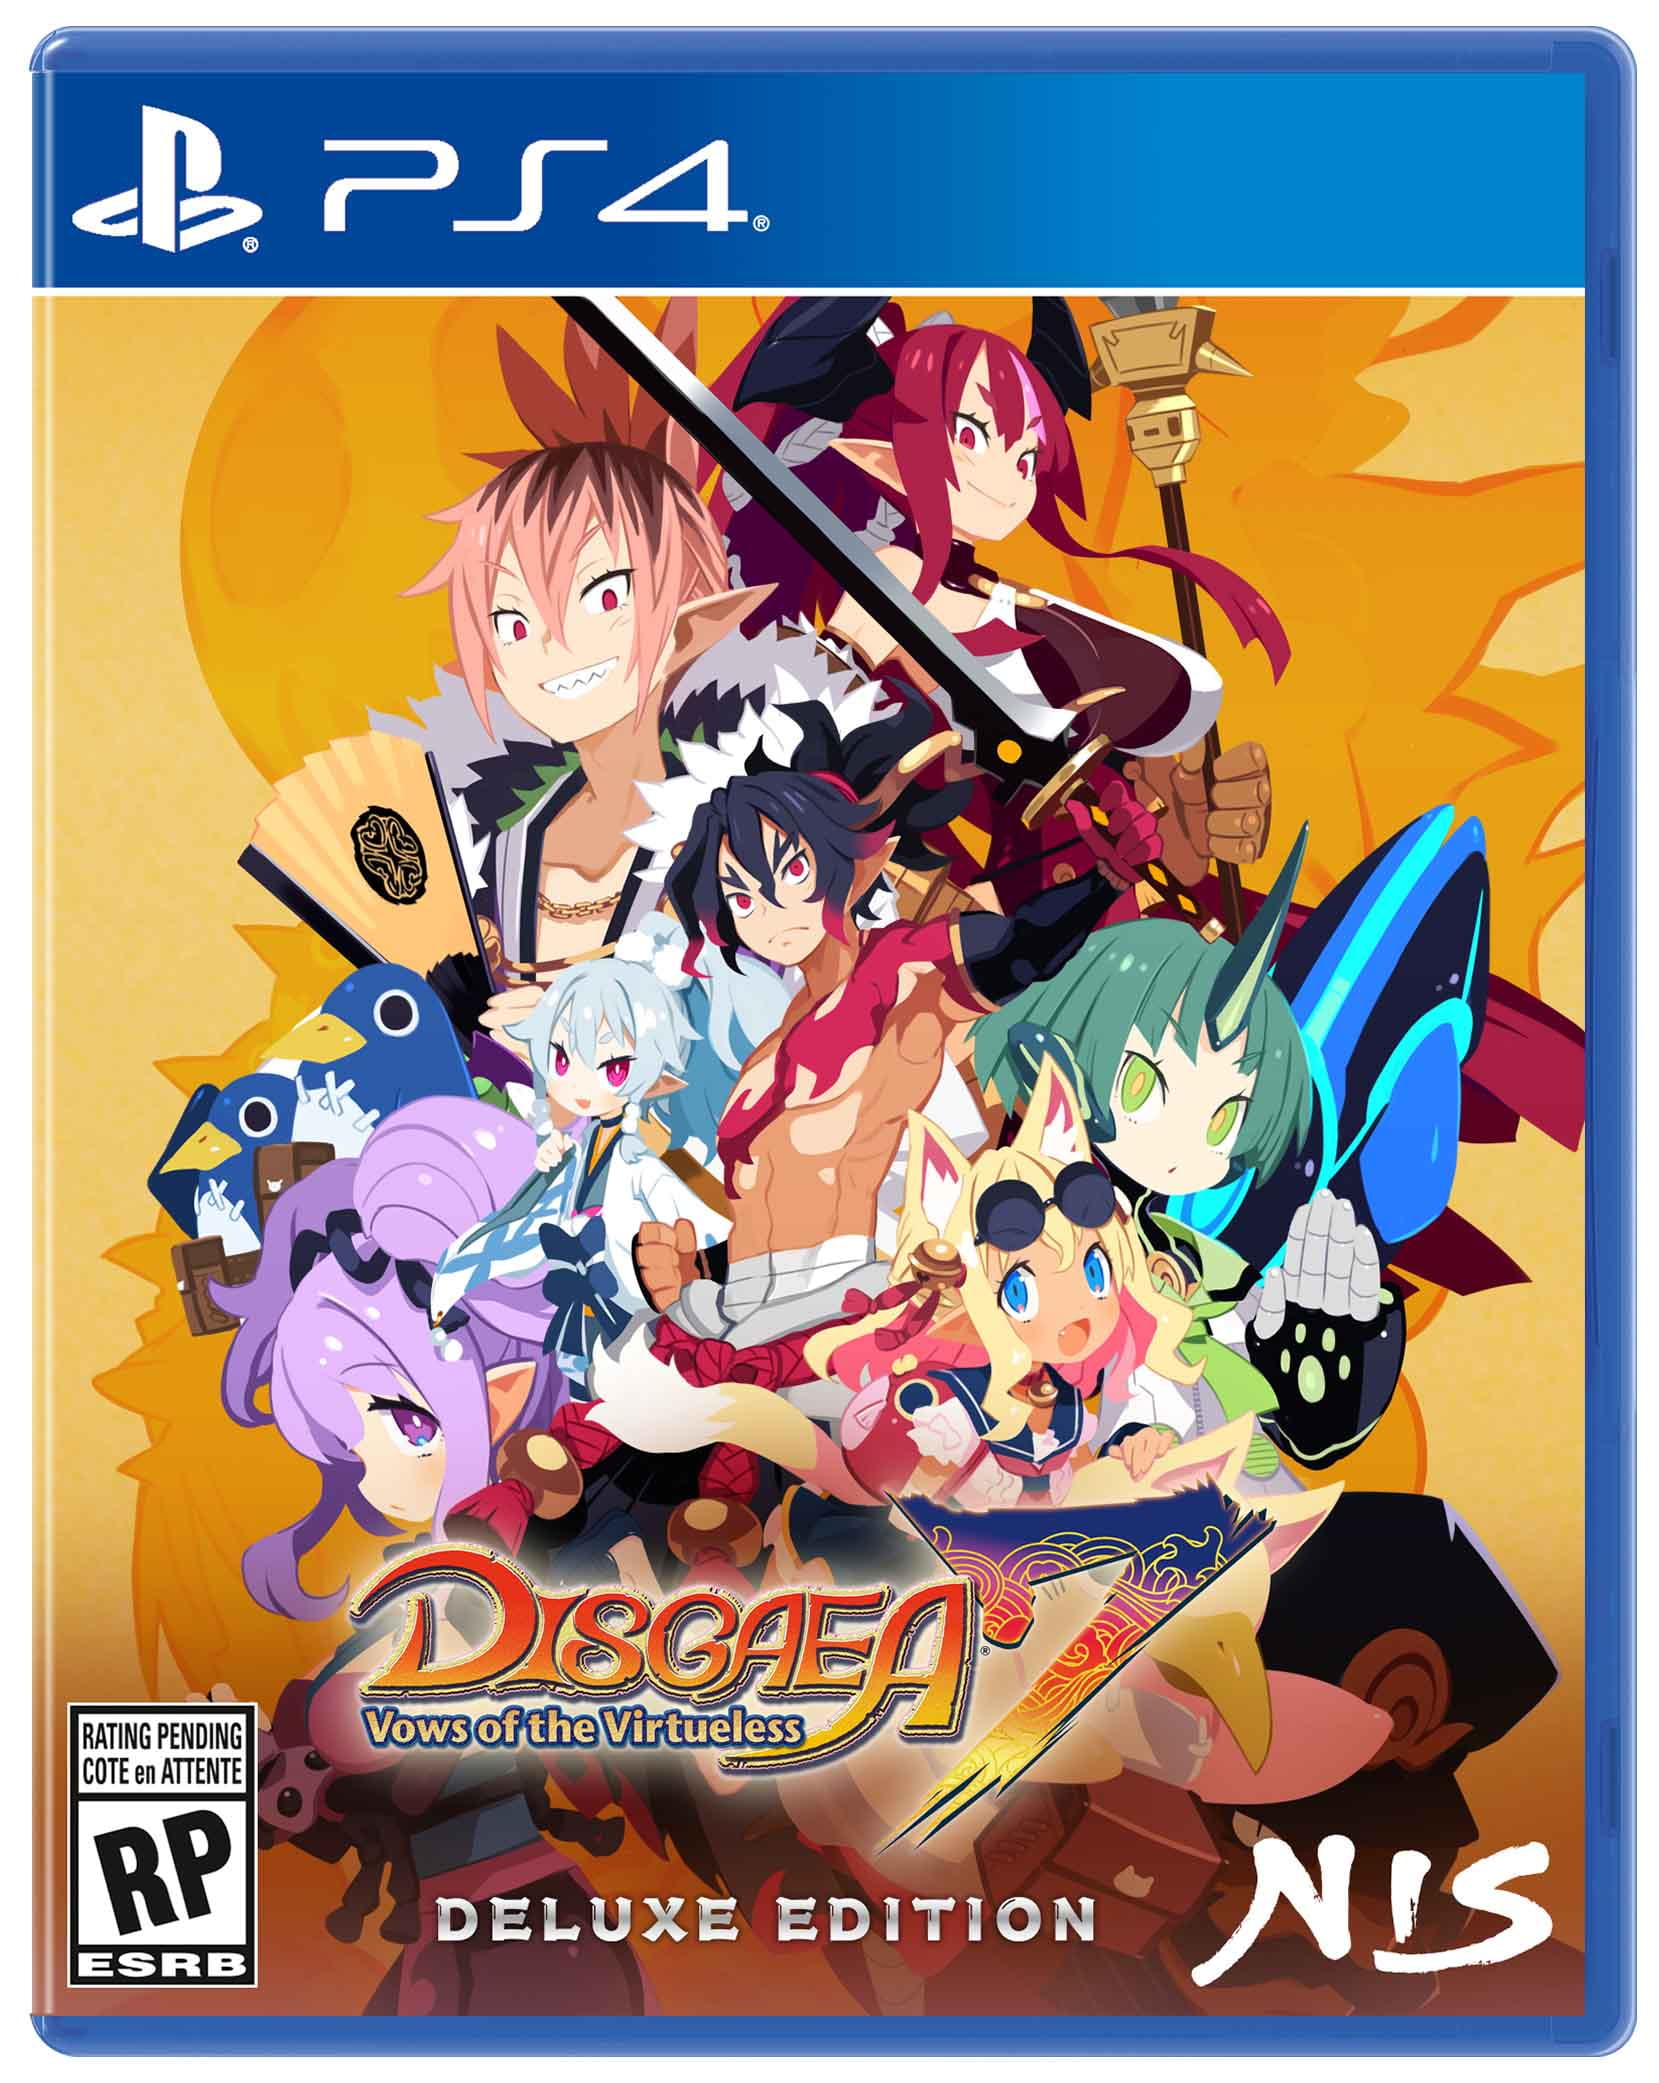 Disgaea 7: Vows of the Virtueless - Deluxe Edition, PlayStation 4